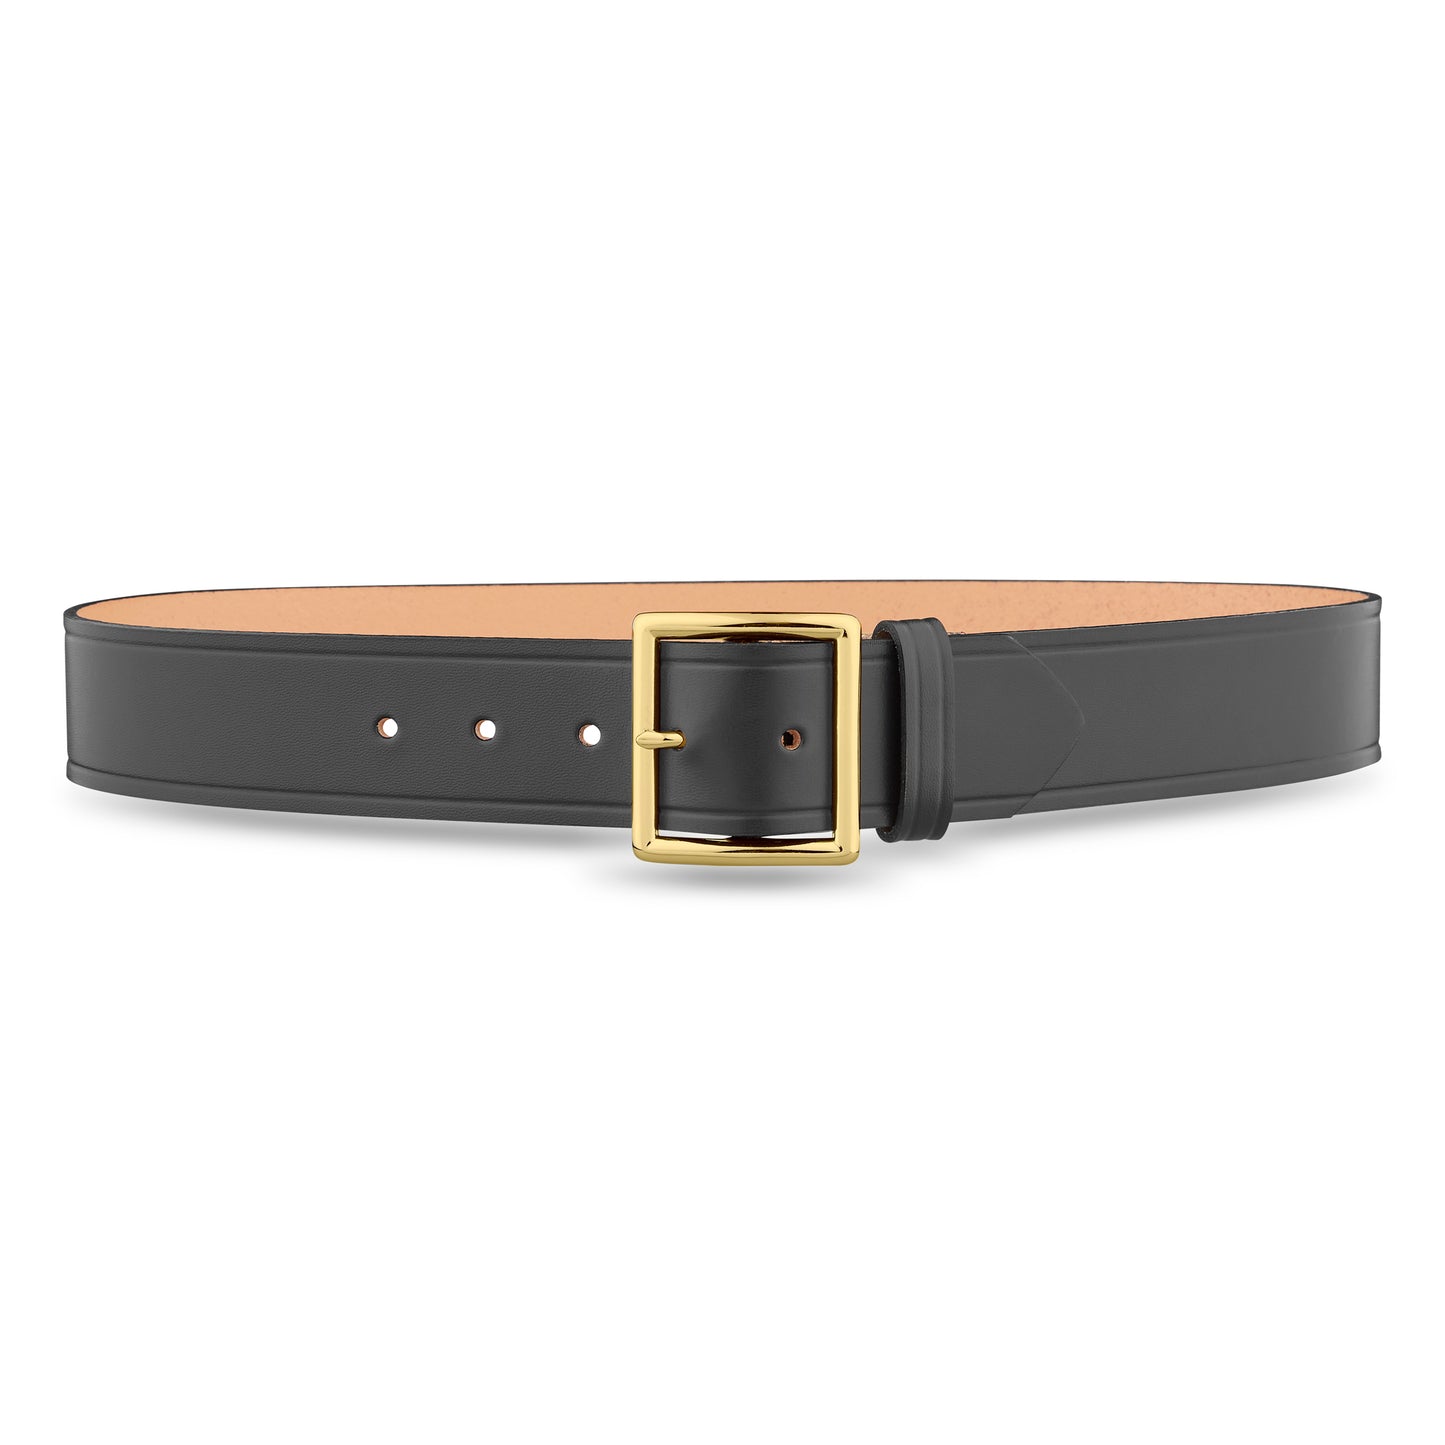 1-3/4-inch black plain leather thick garrison duty belt with solid brass gold buckle used by law enforcement ems and firefighter trades 